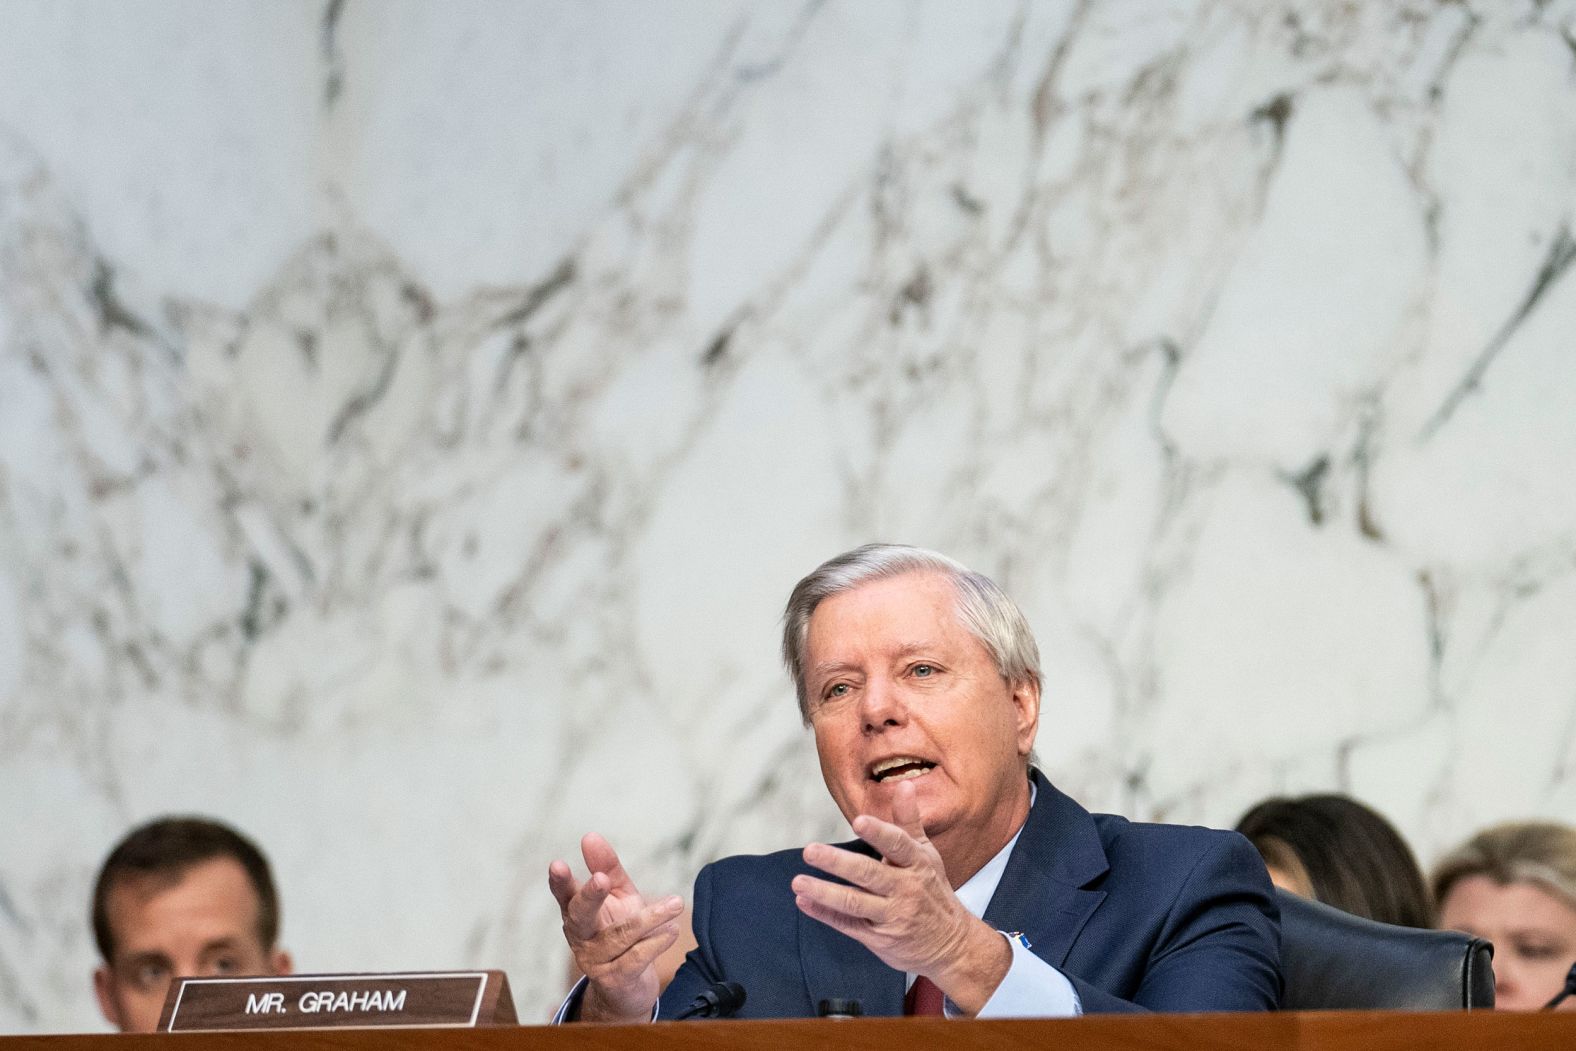 Graham questions Jackson on March 23. <a href="index.php?page=&url=https%3A%2F%2Fwww.cnn.com%2Fpolitics%2Flive-news%2Fketanji-brown-jackson-hearing-3-23-22%2Fh_075a3e15d5f7d4ceda8d402ec1539992" target="_blank">Democrats bristled</a> at Graham's testy questioning of Jackson.